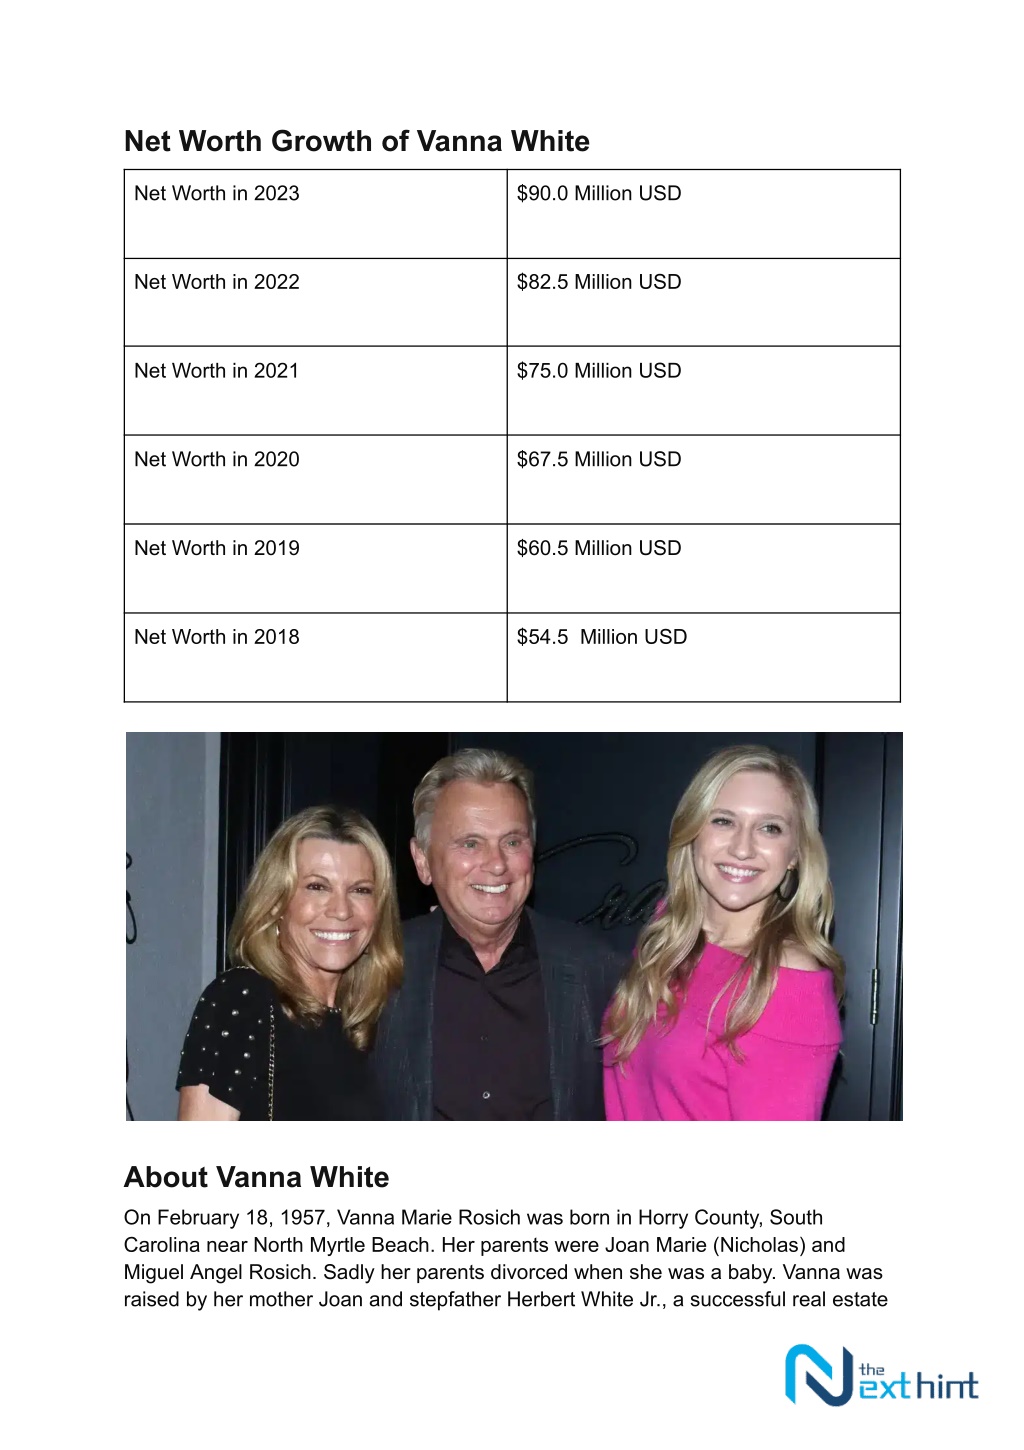 PPT Vanna White Net Worth How Rich Is The American TV Personality